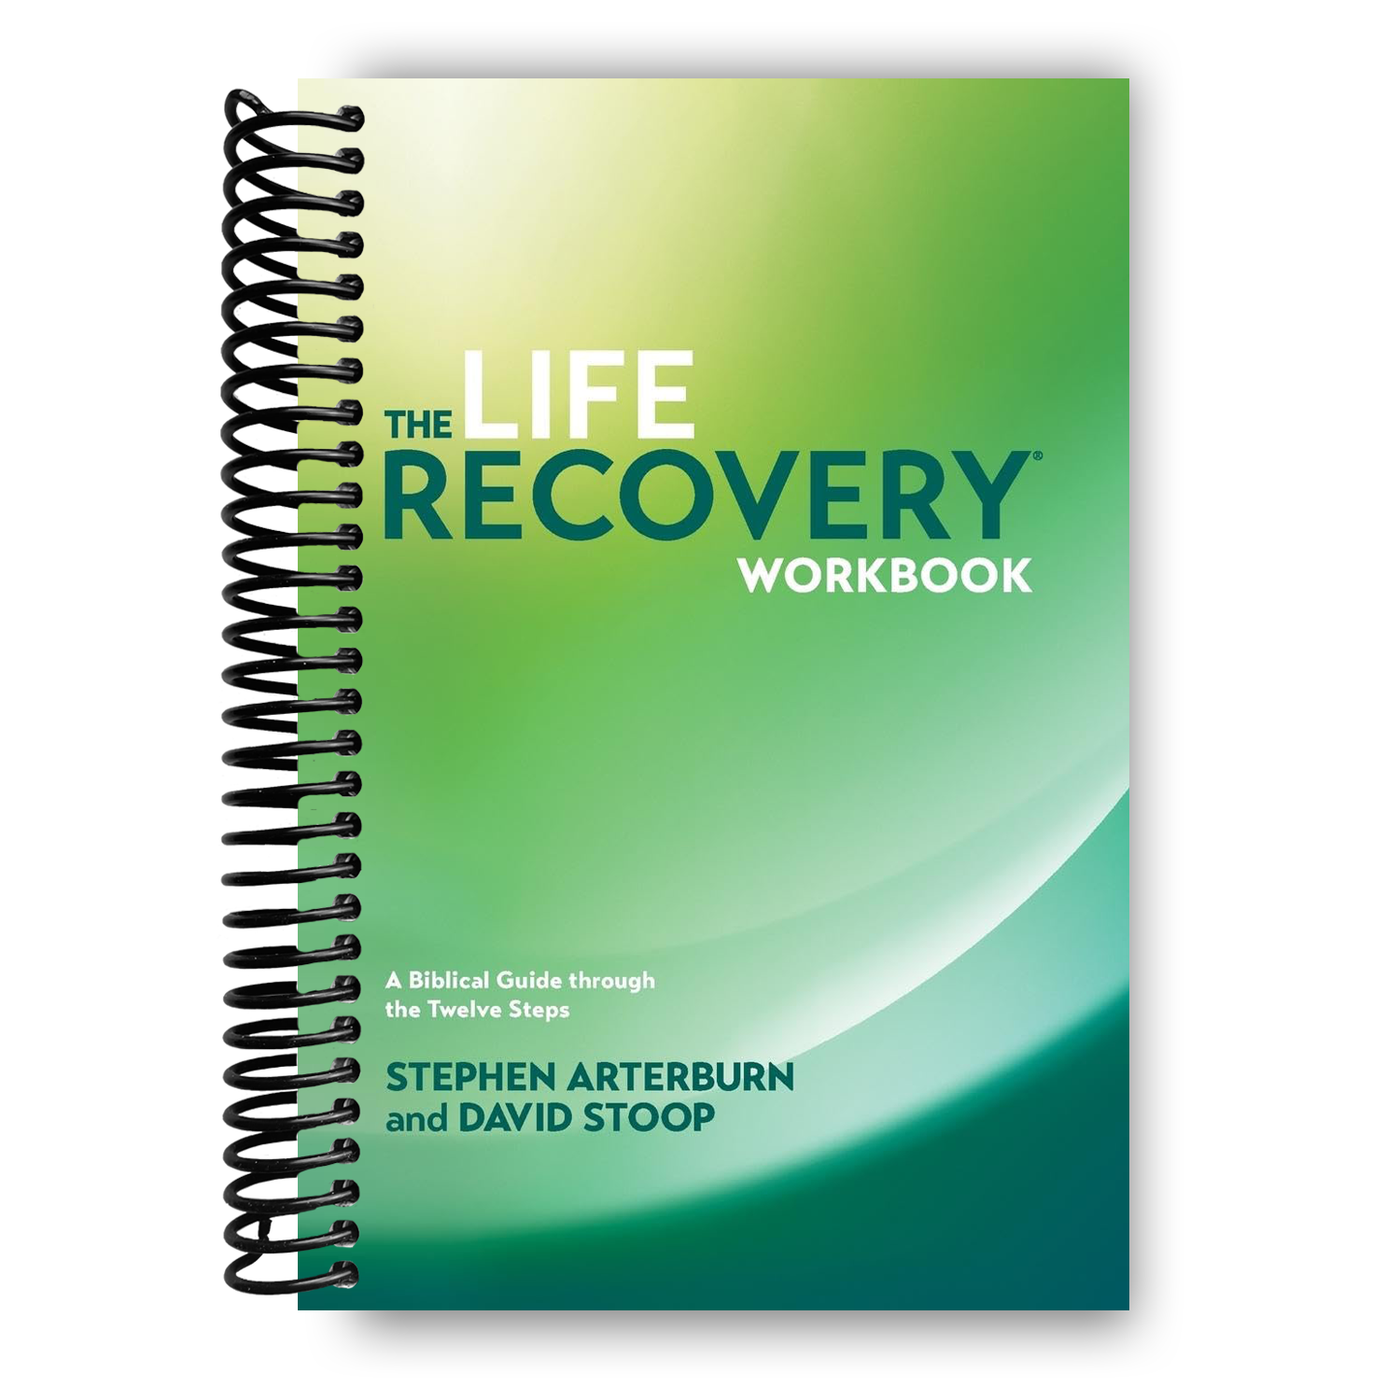 The Life Recovery Workbook (Spiral Bound)